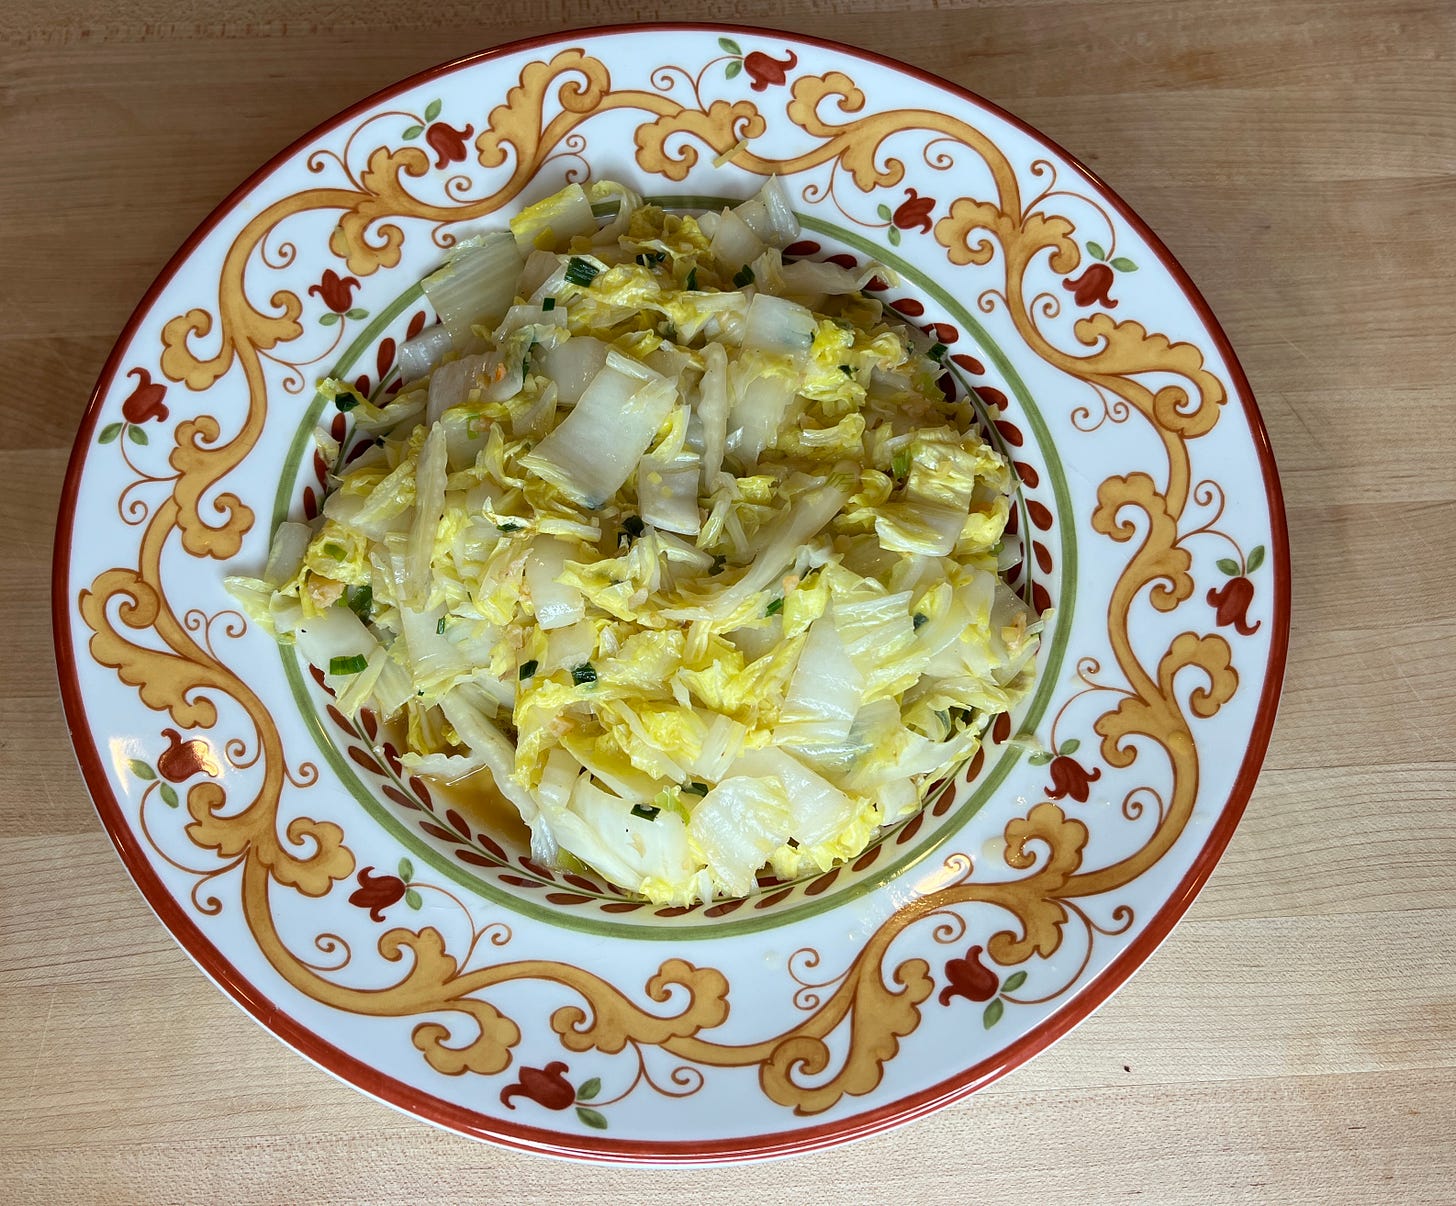 Shandong-style cabbage with dried shrimp